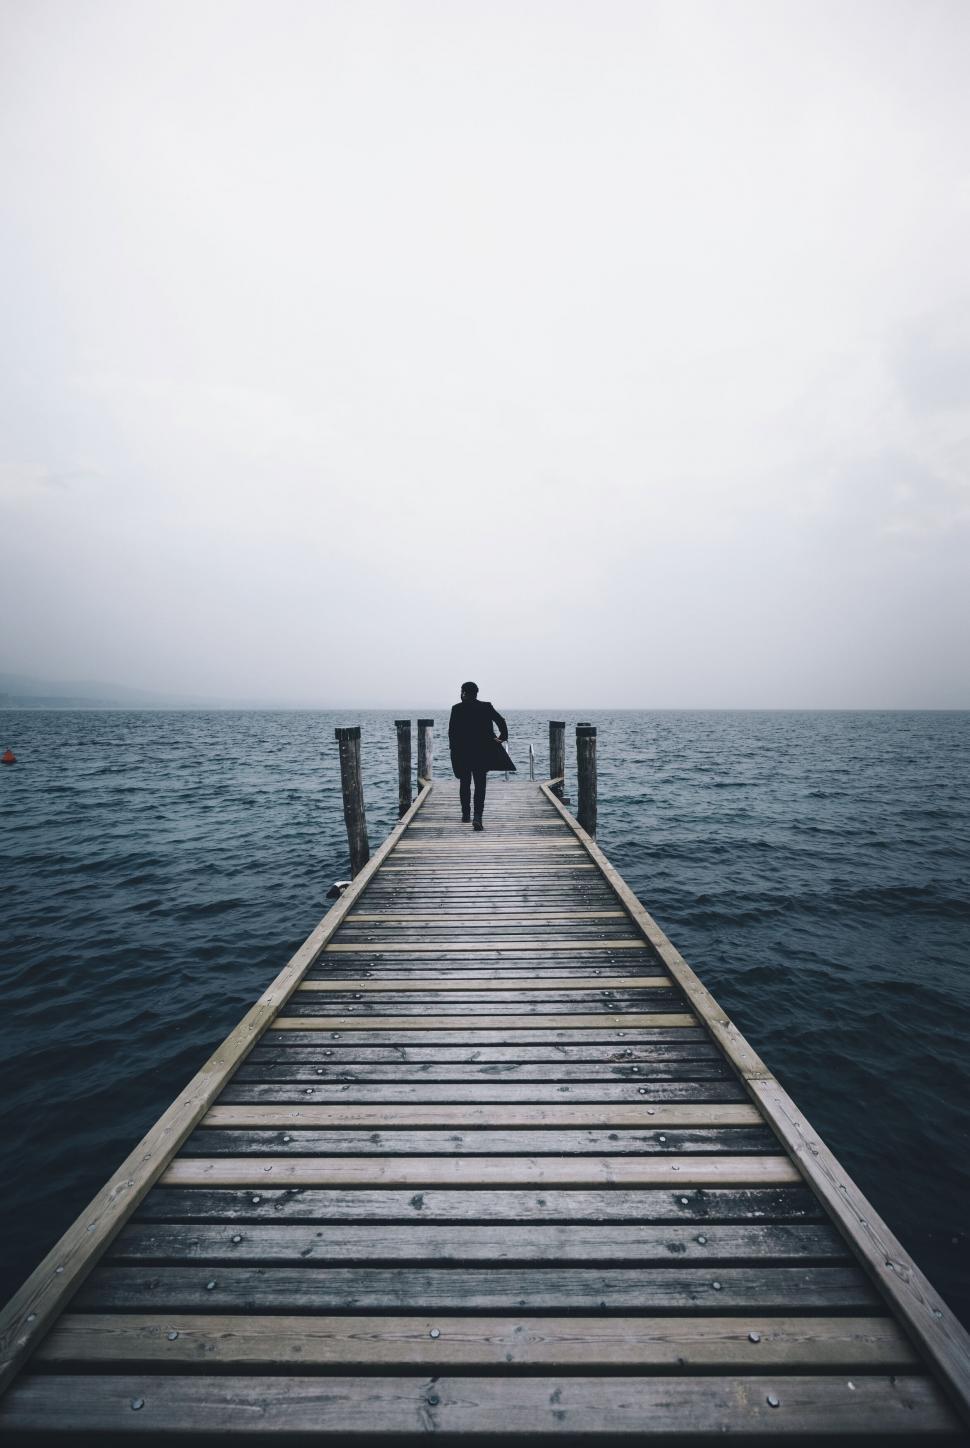 Free Image of A person walking on a dock over water 